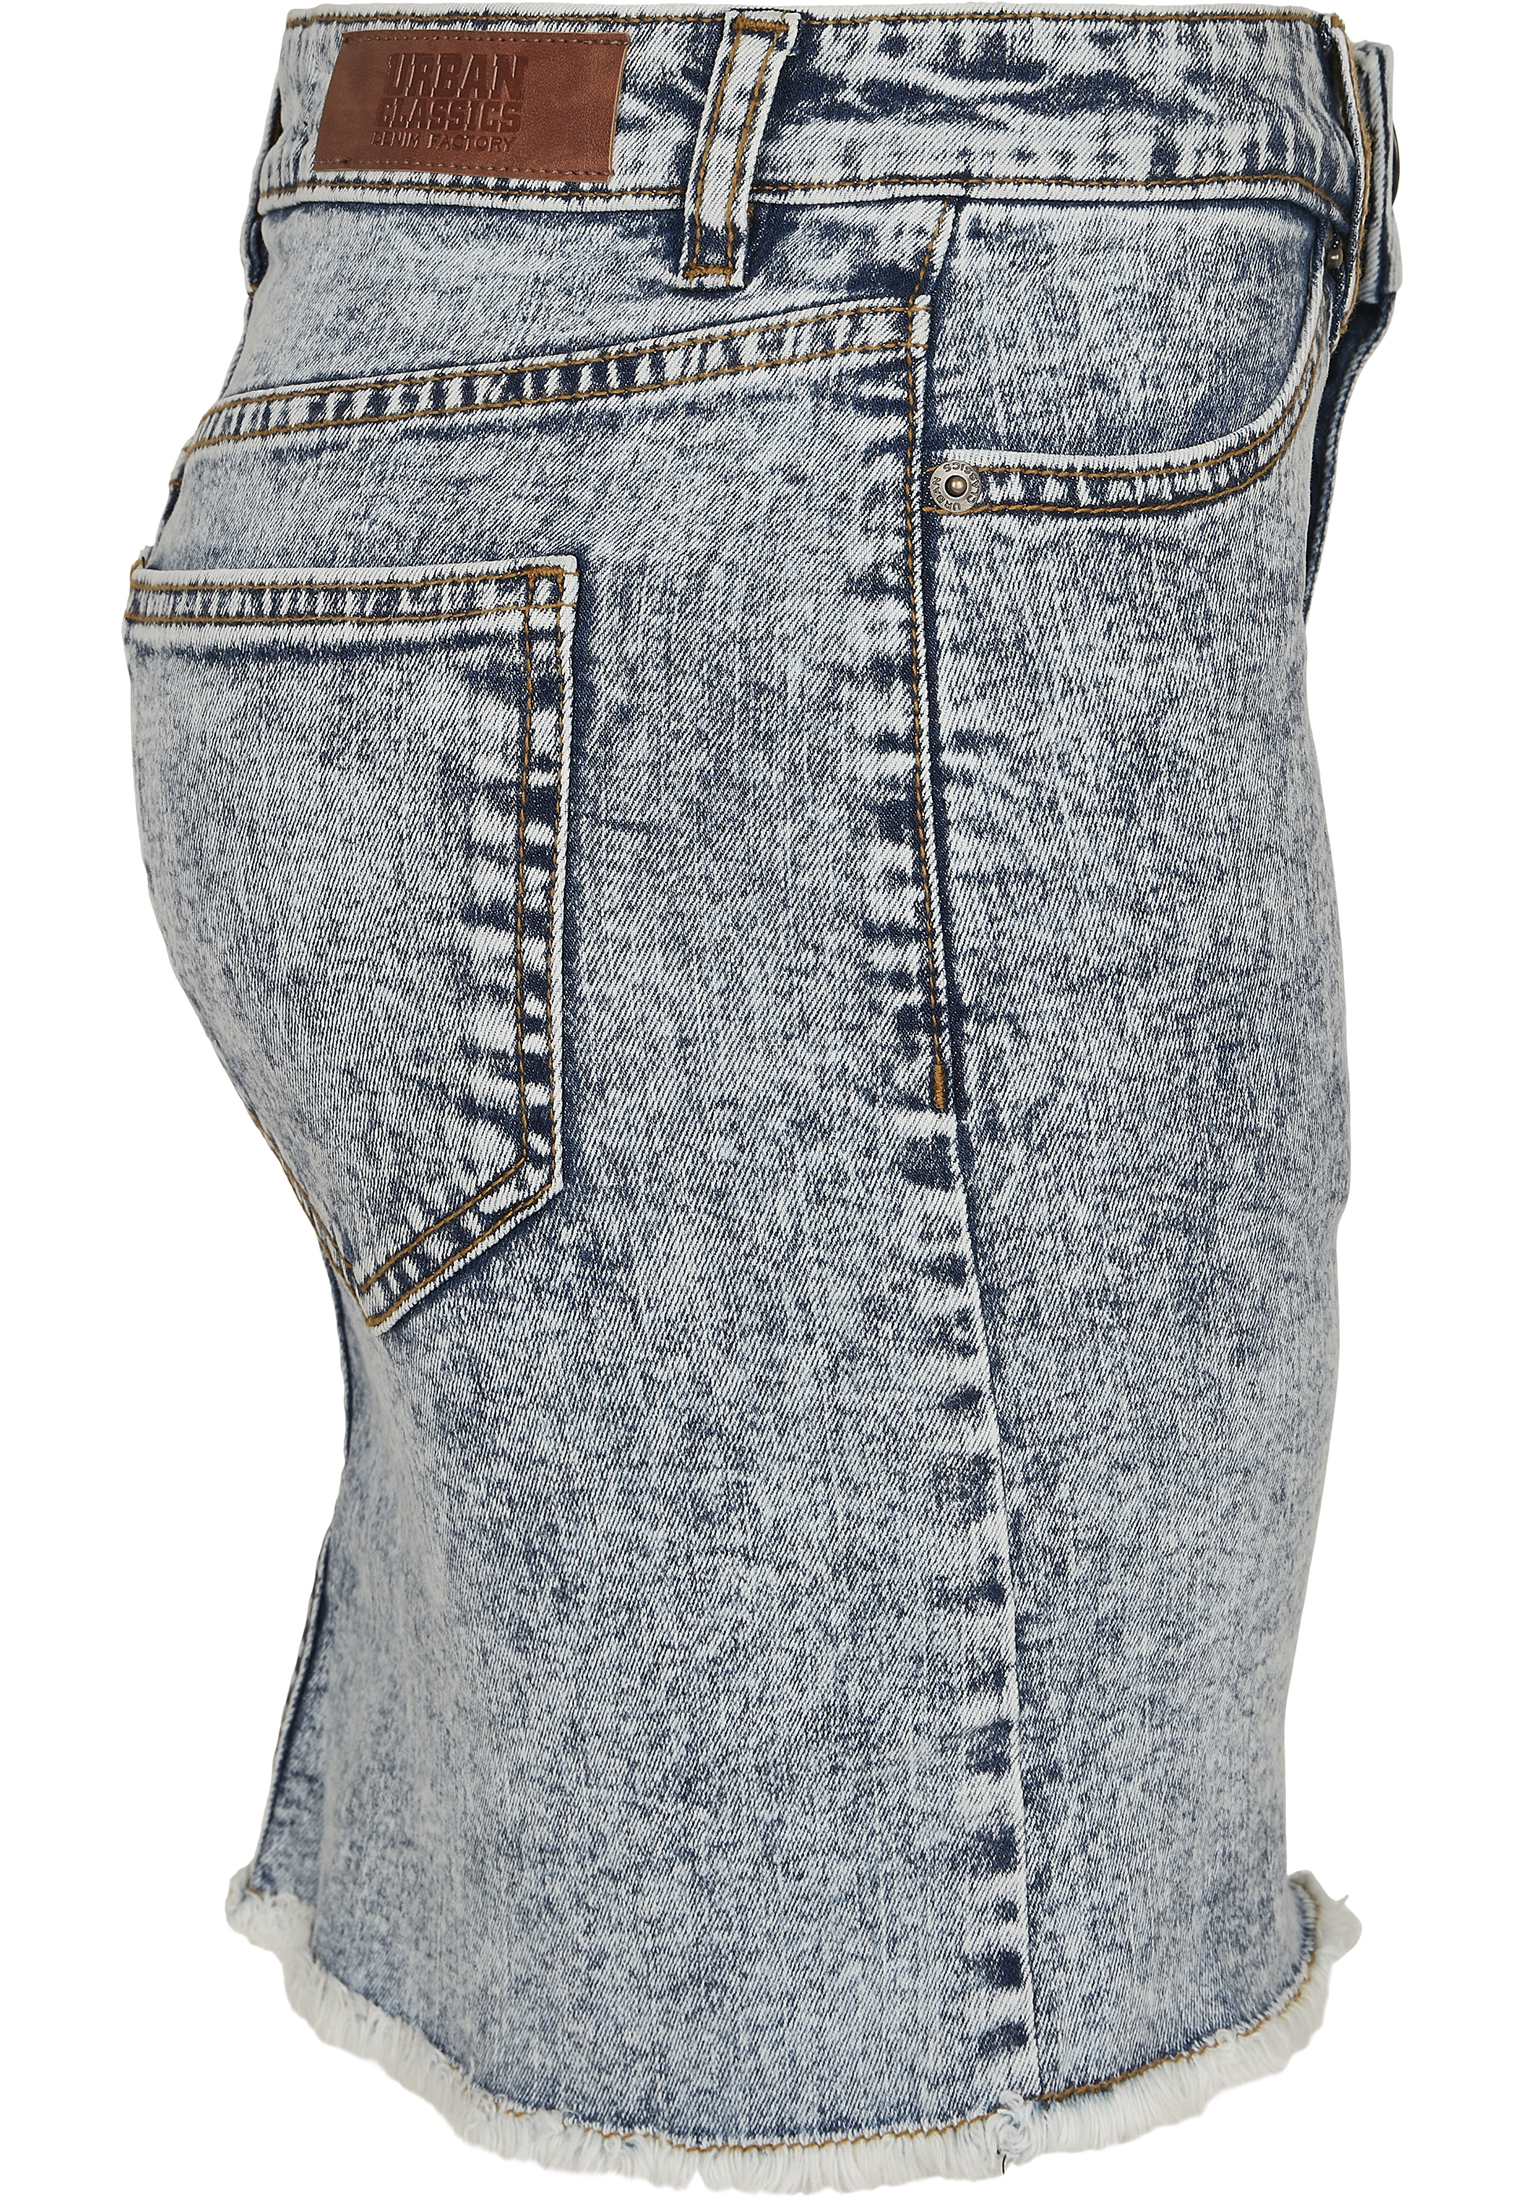 Curvy Ladies Denim Skirt in Farbe light skyblue acid washed